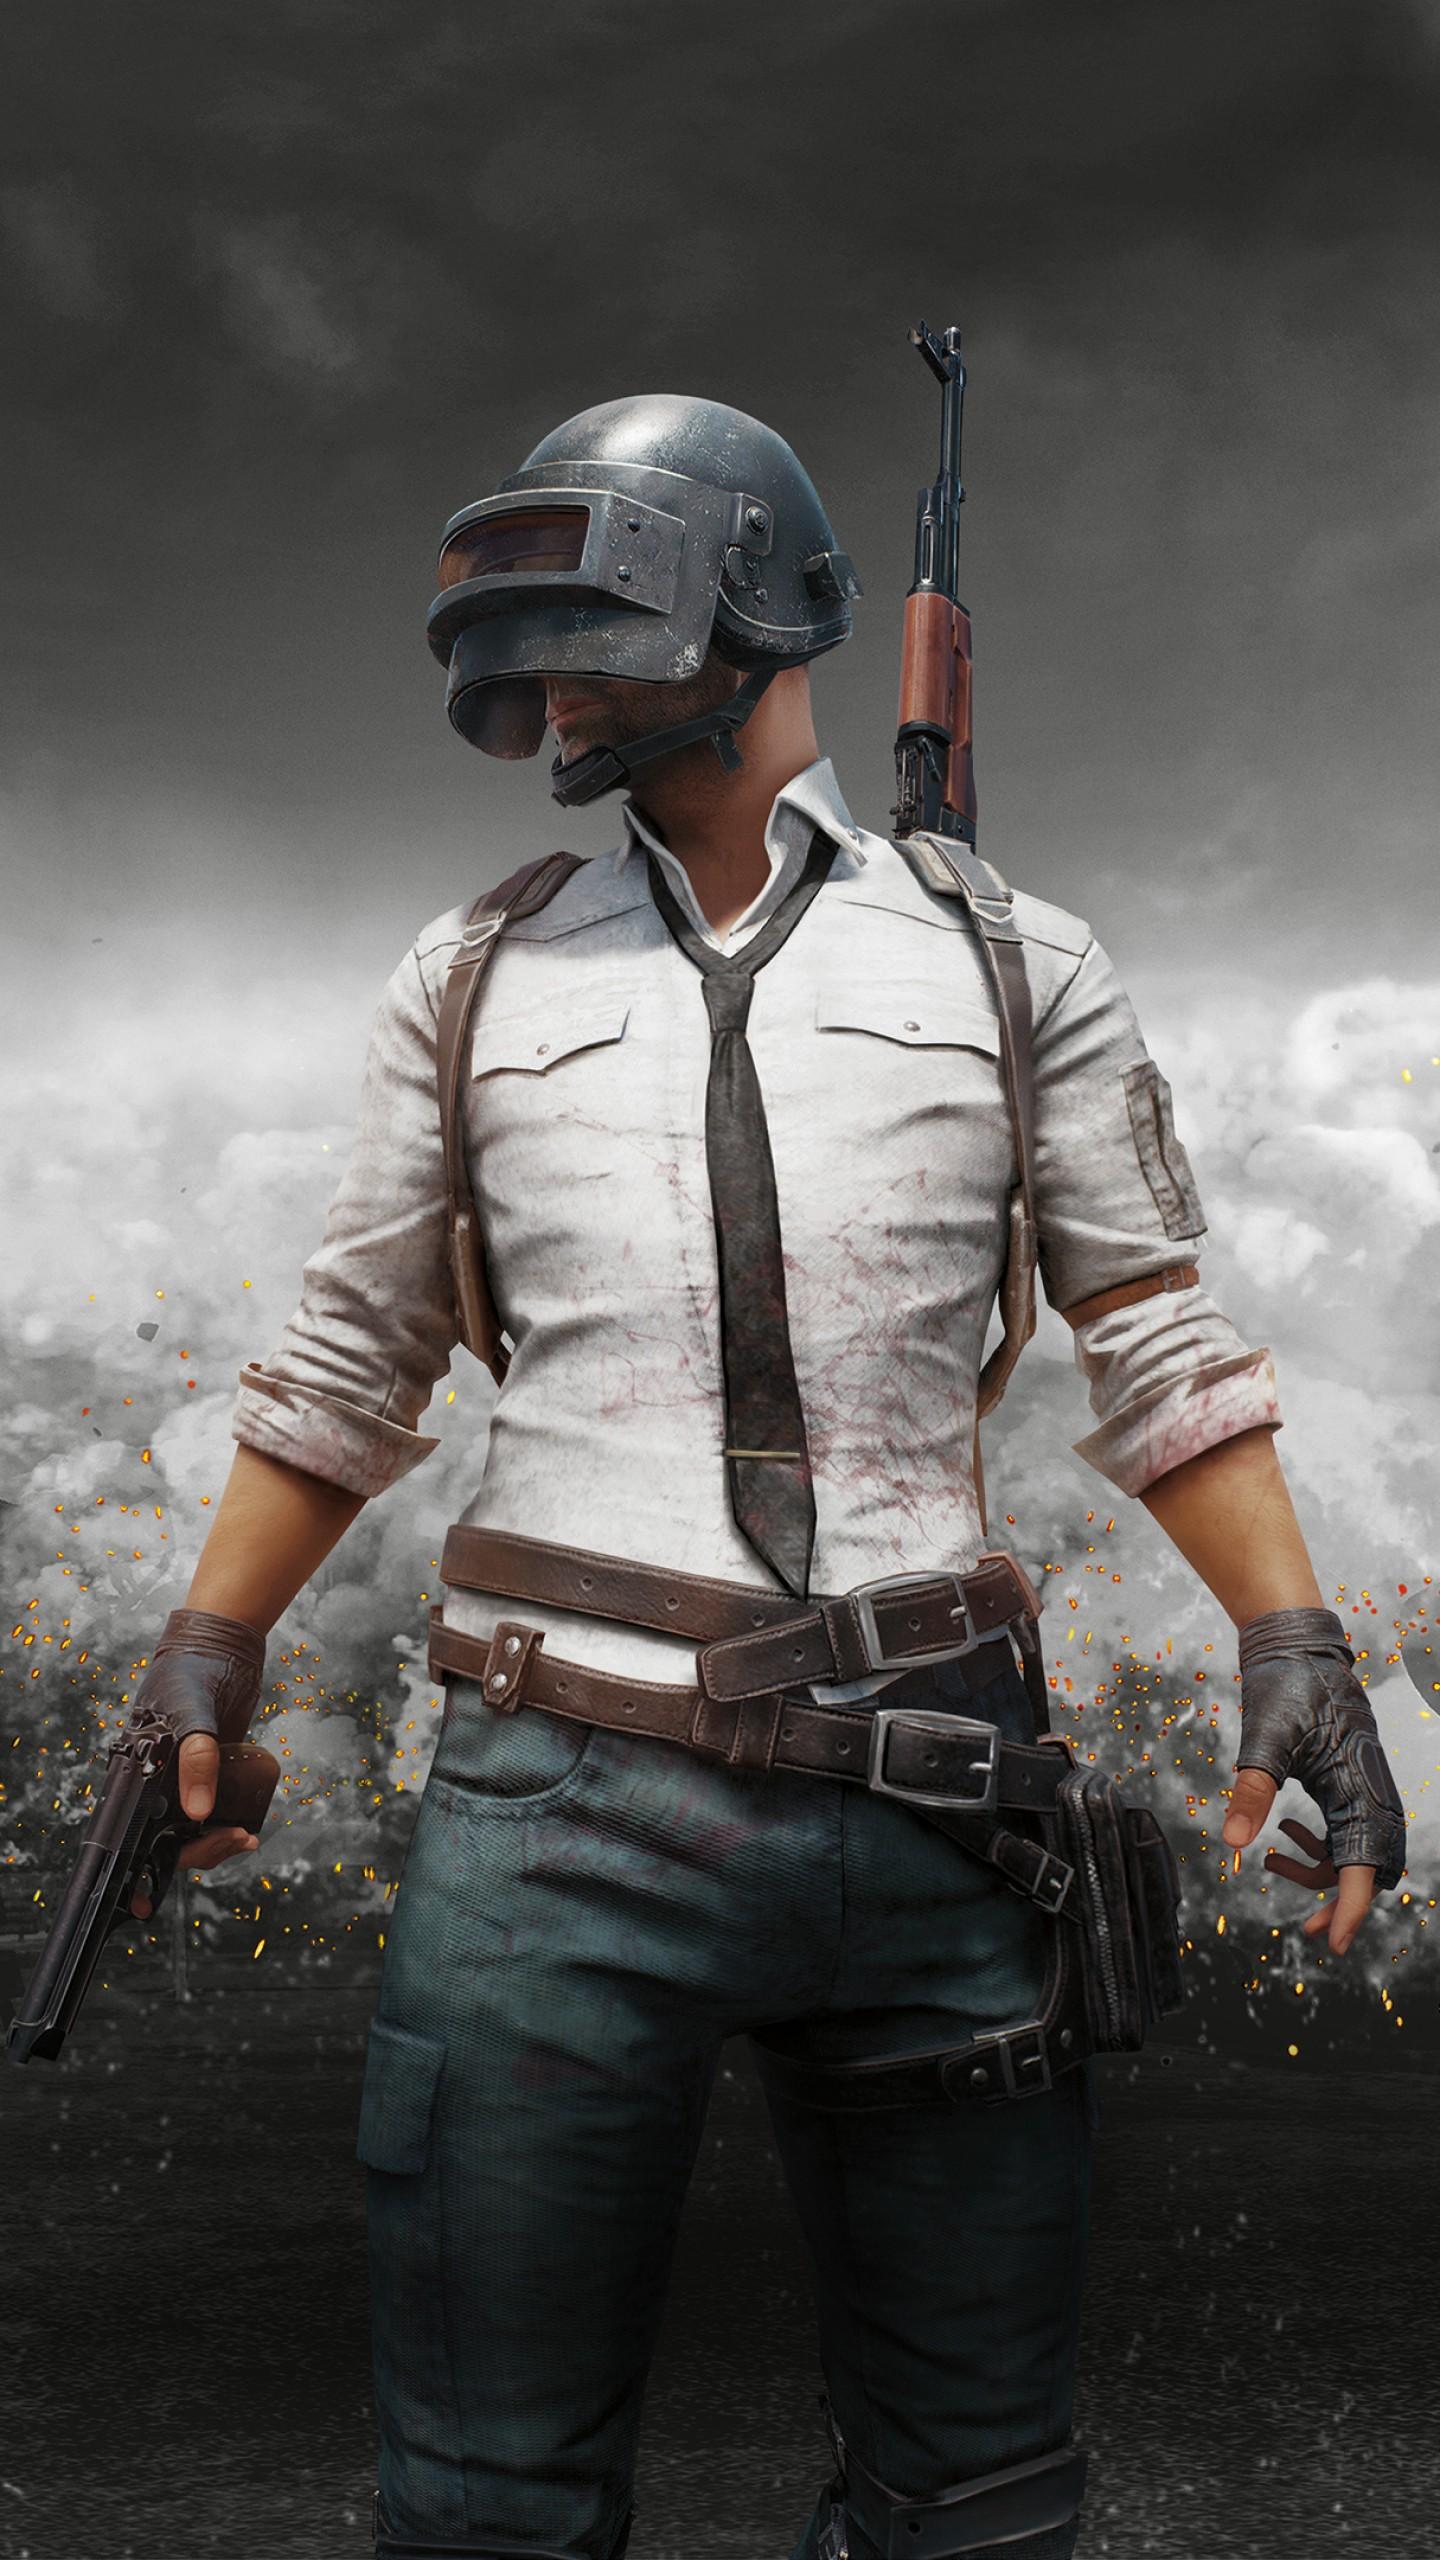 Wallpaper PUBG, PlayerUnknown's Battlegrounds, 4K, Games,. Wallpaper for iPhone, Android, Mobile and Desktop